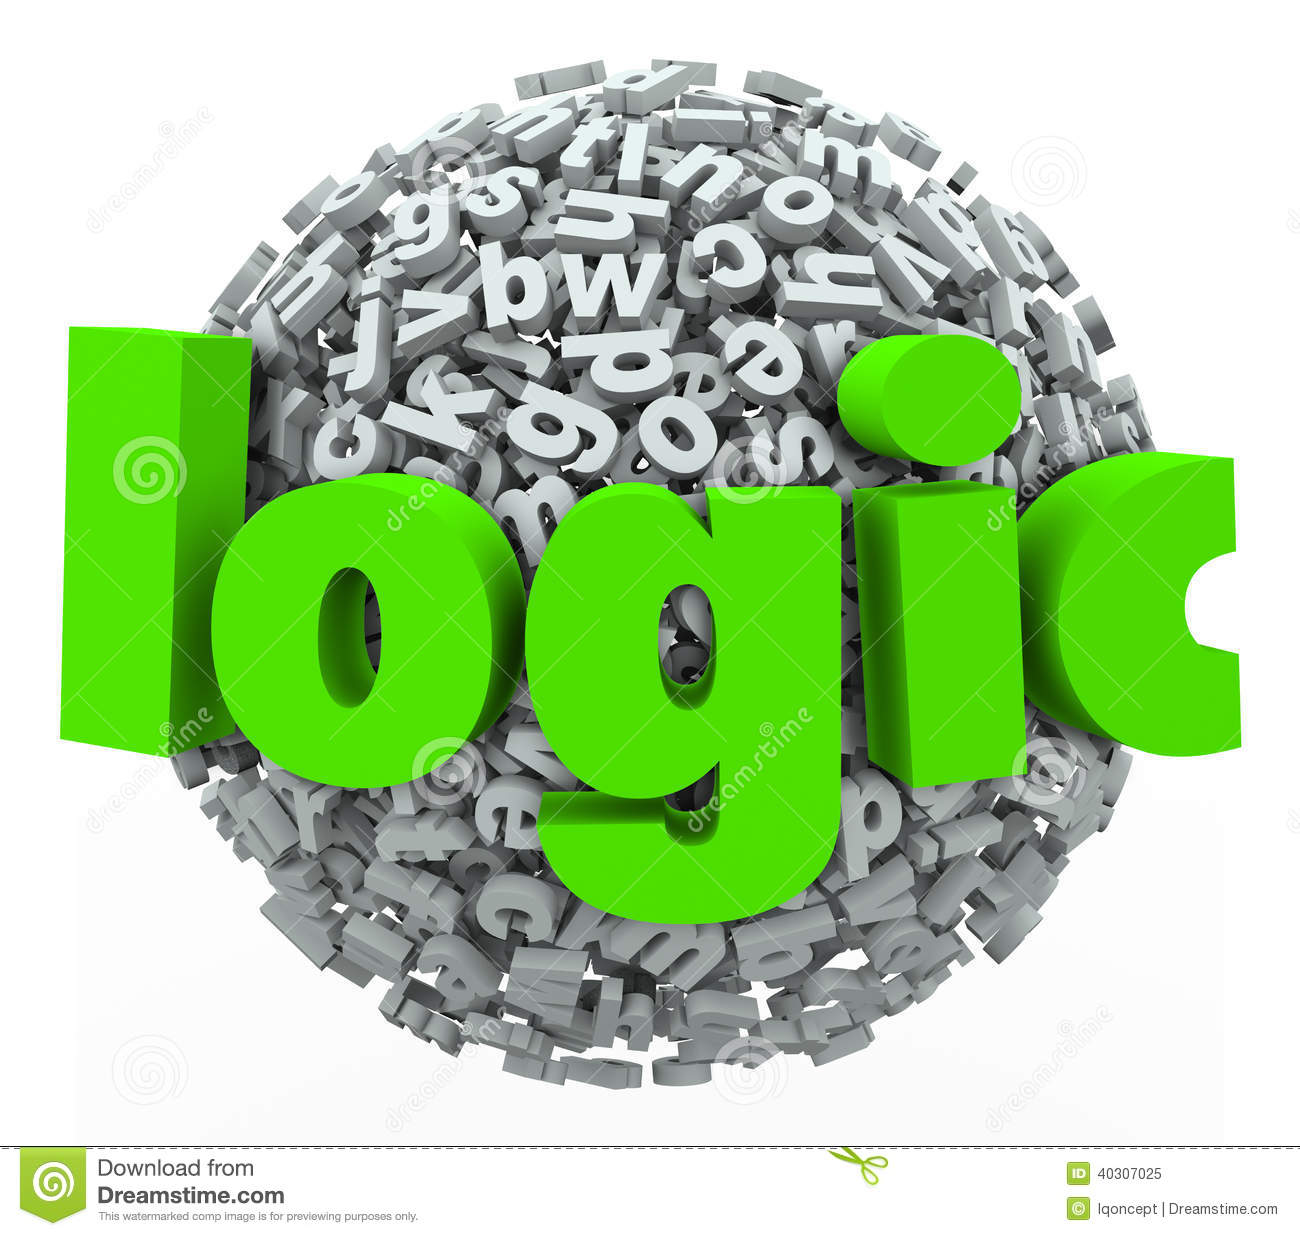 Logic 3d Word On A Ball Or Sphere Of Letters To Illustrate Reason And